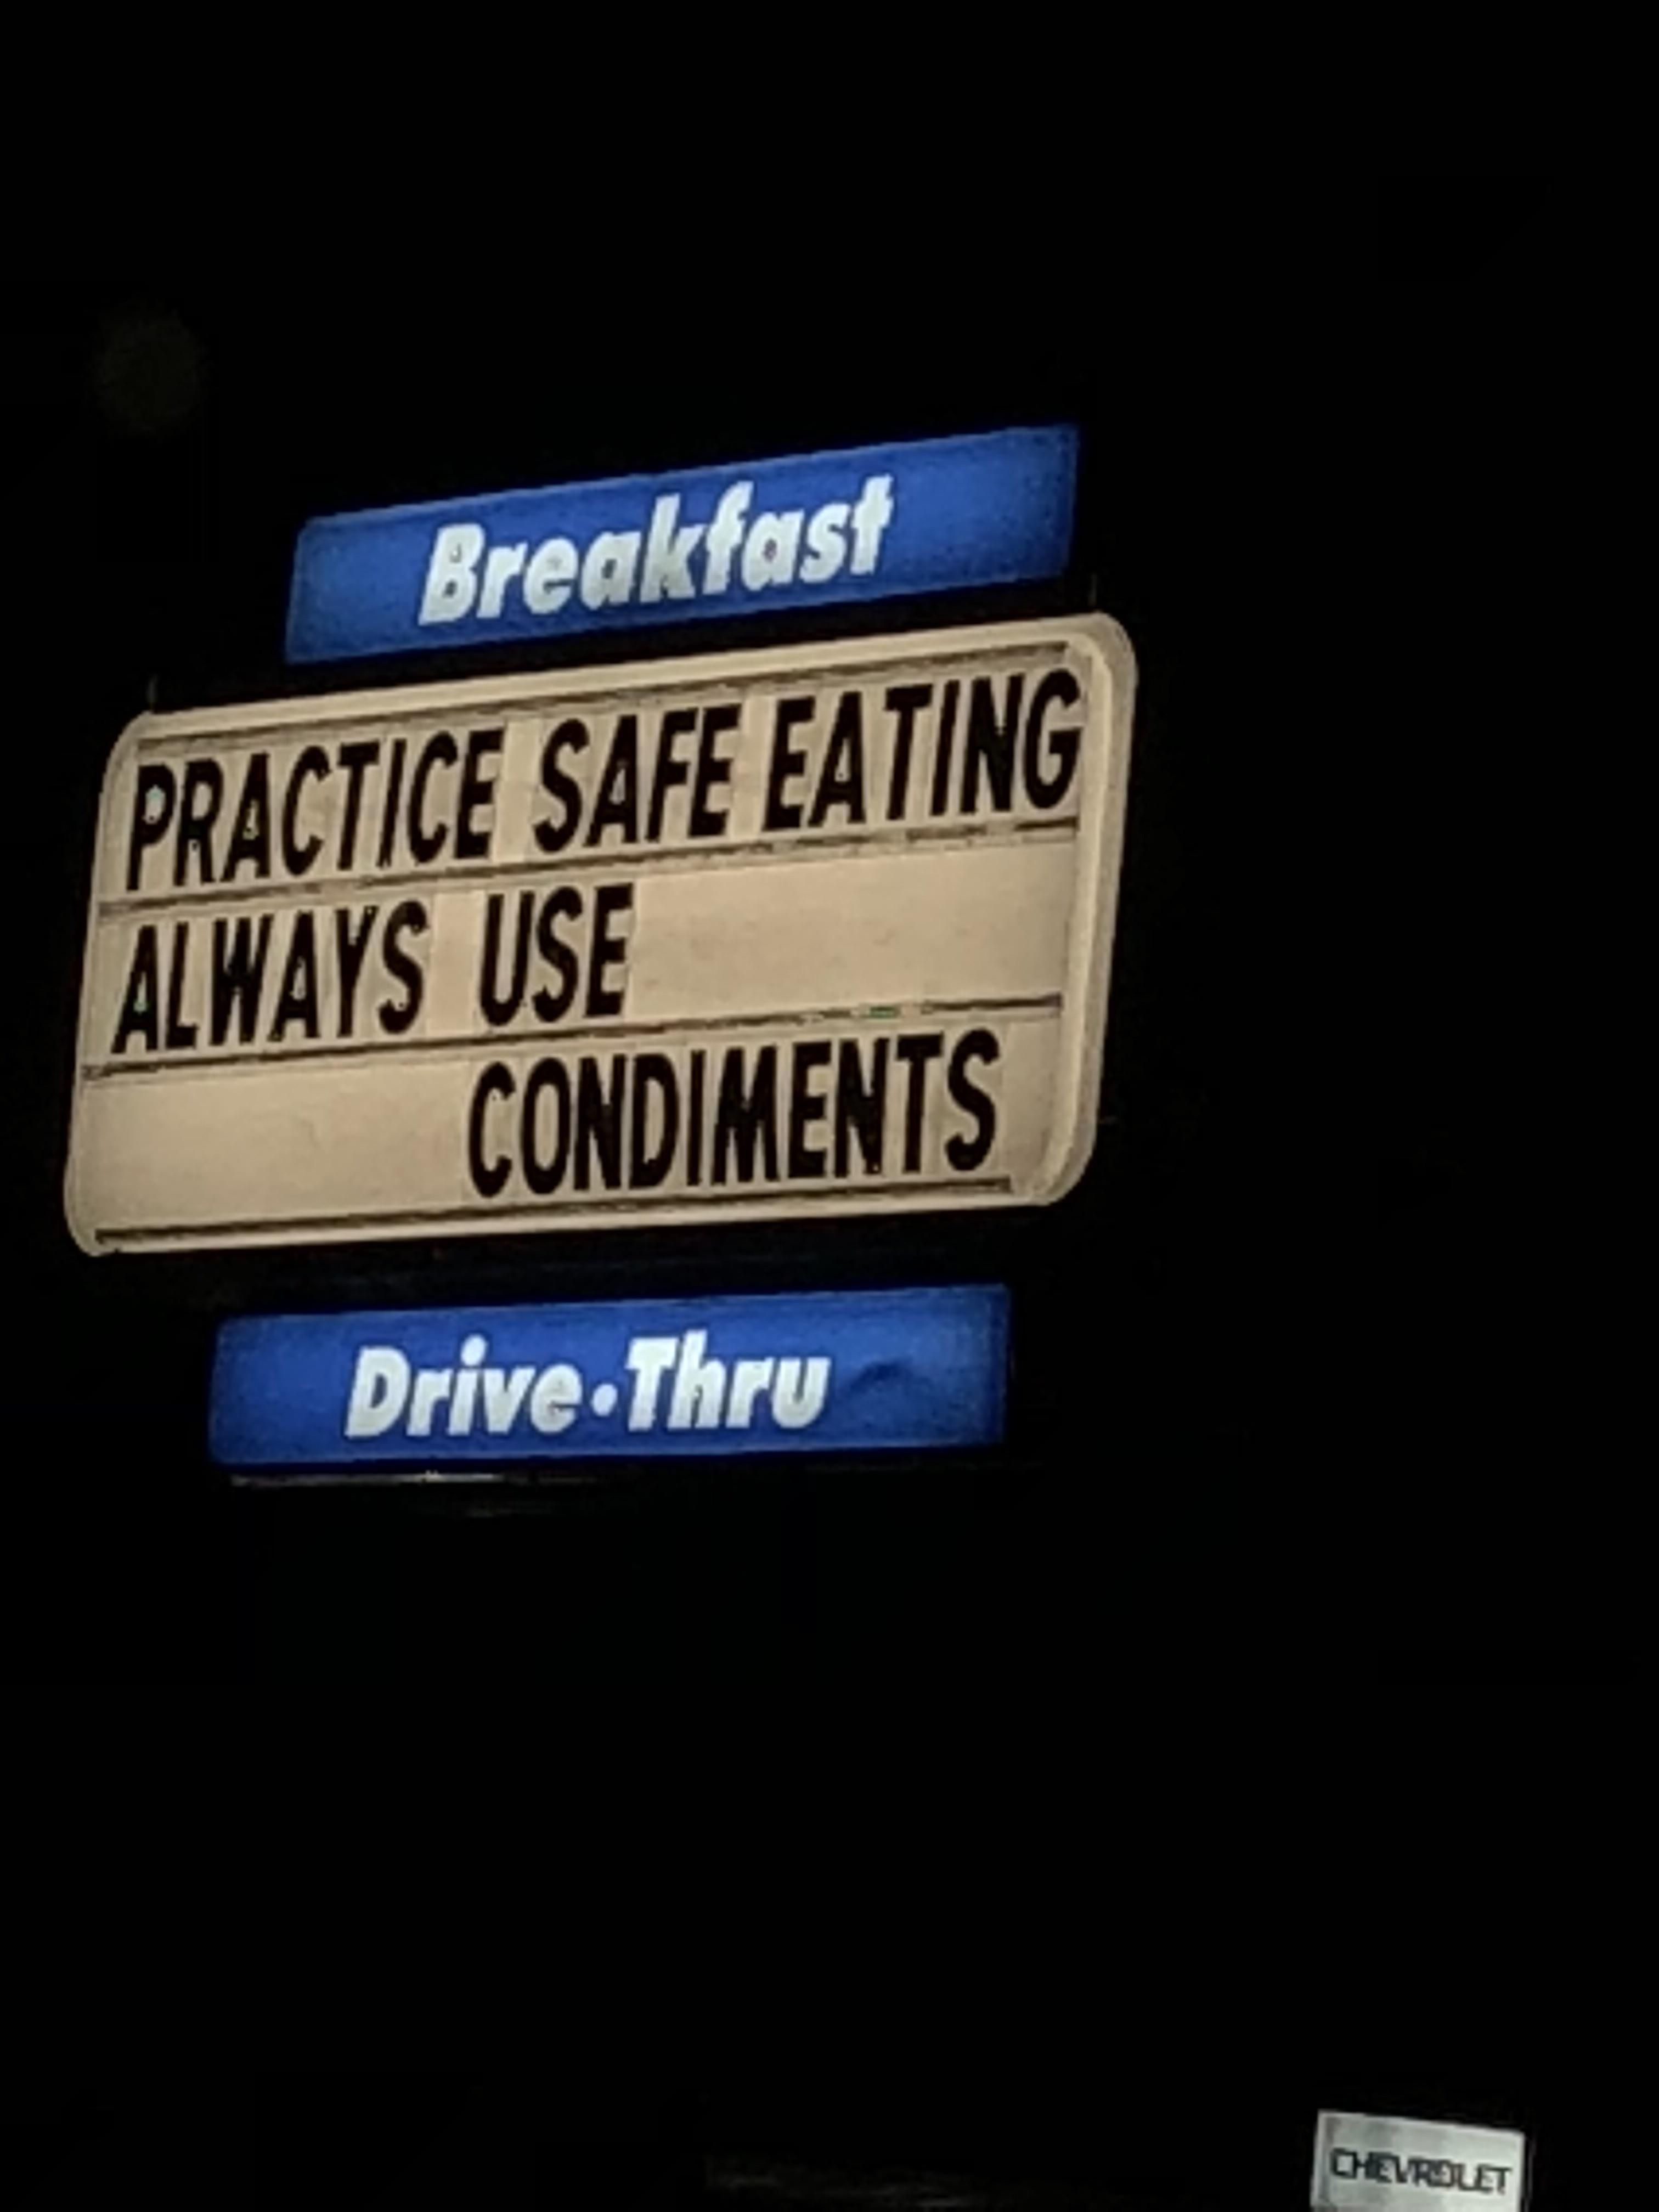 Sonic knows safety